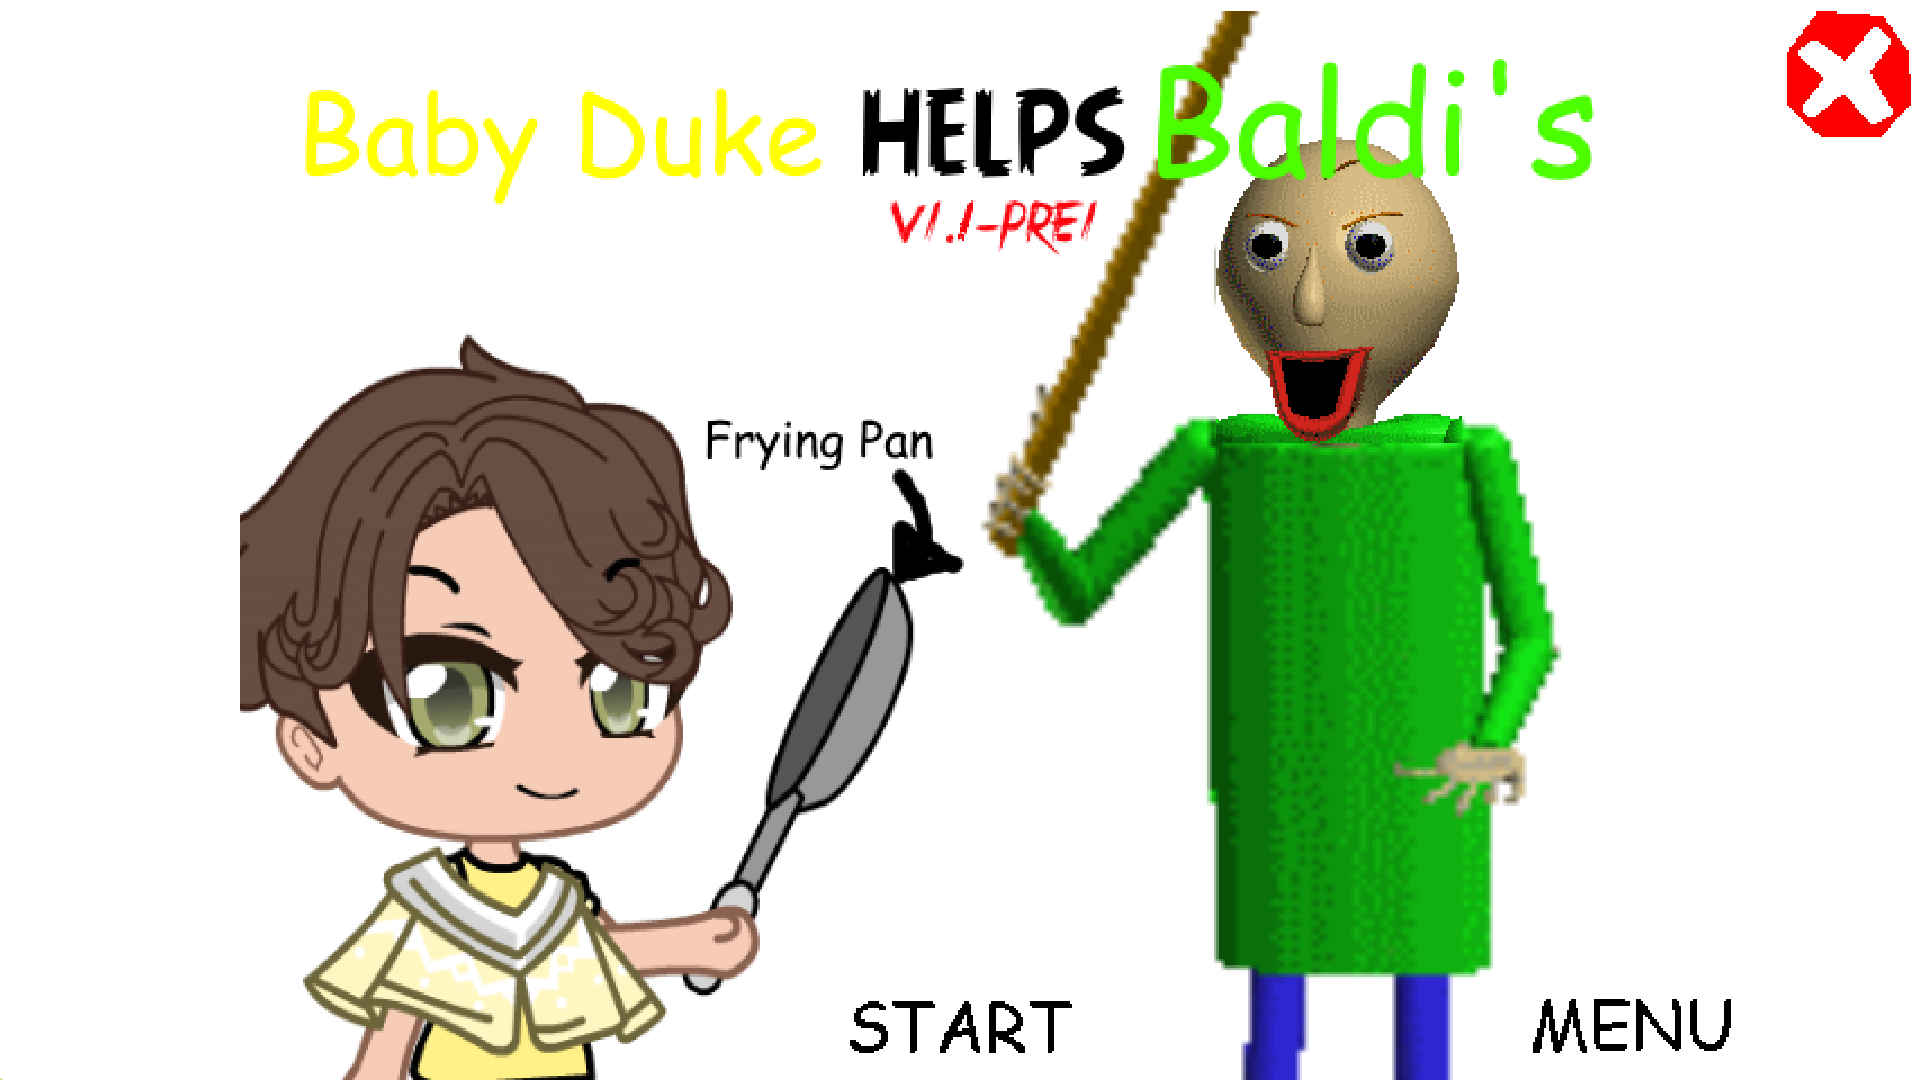 Baby Duke Helps Baldi's V1.1 by Cyril Gamers